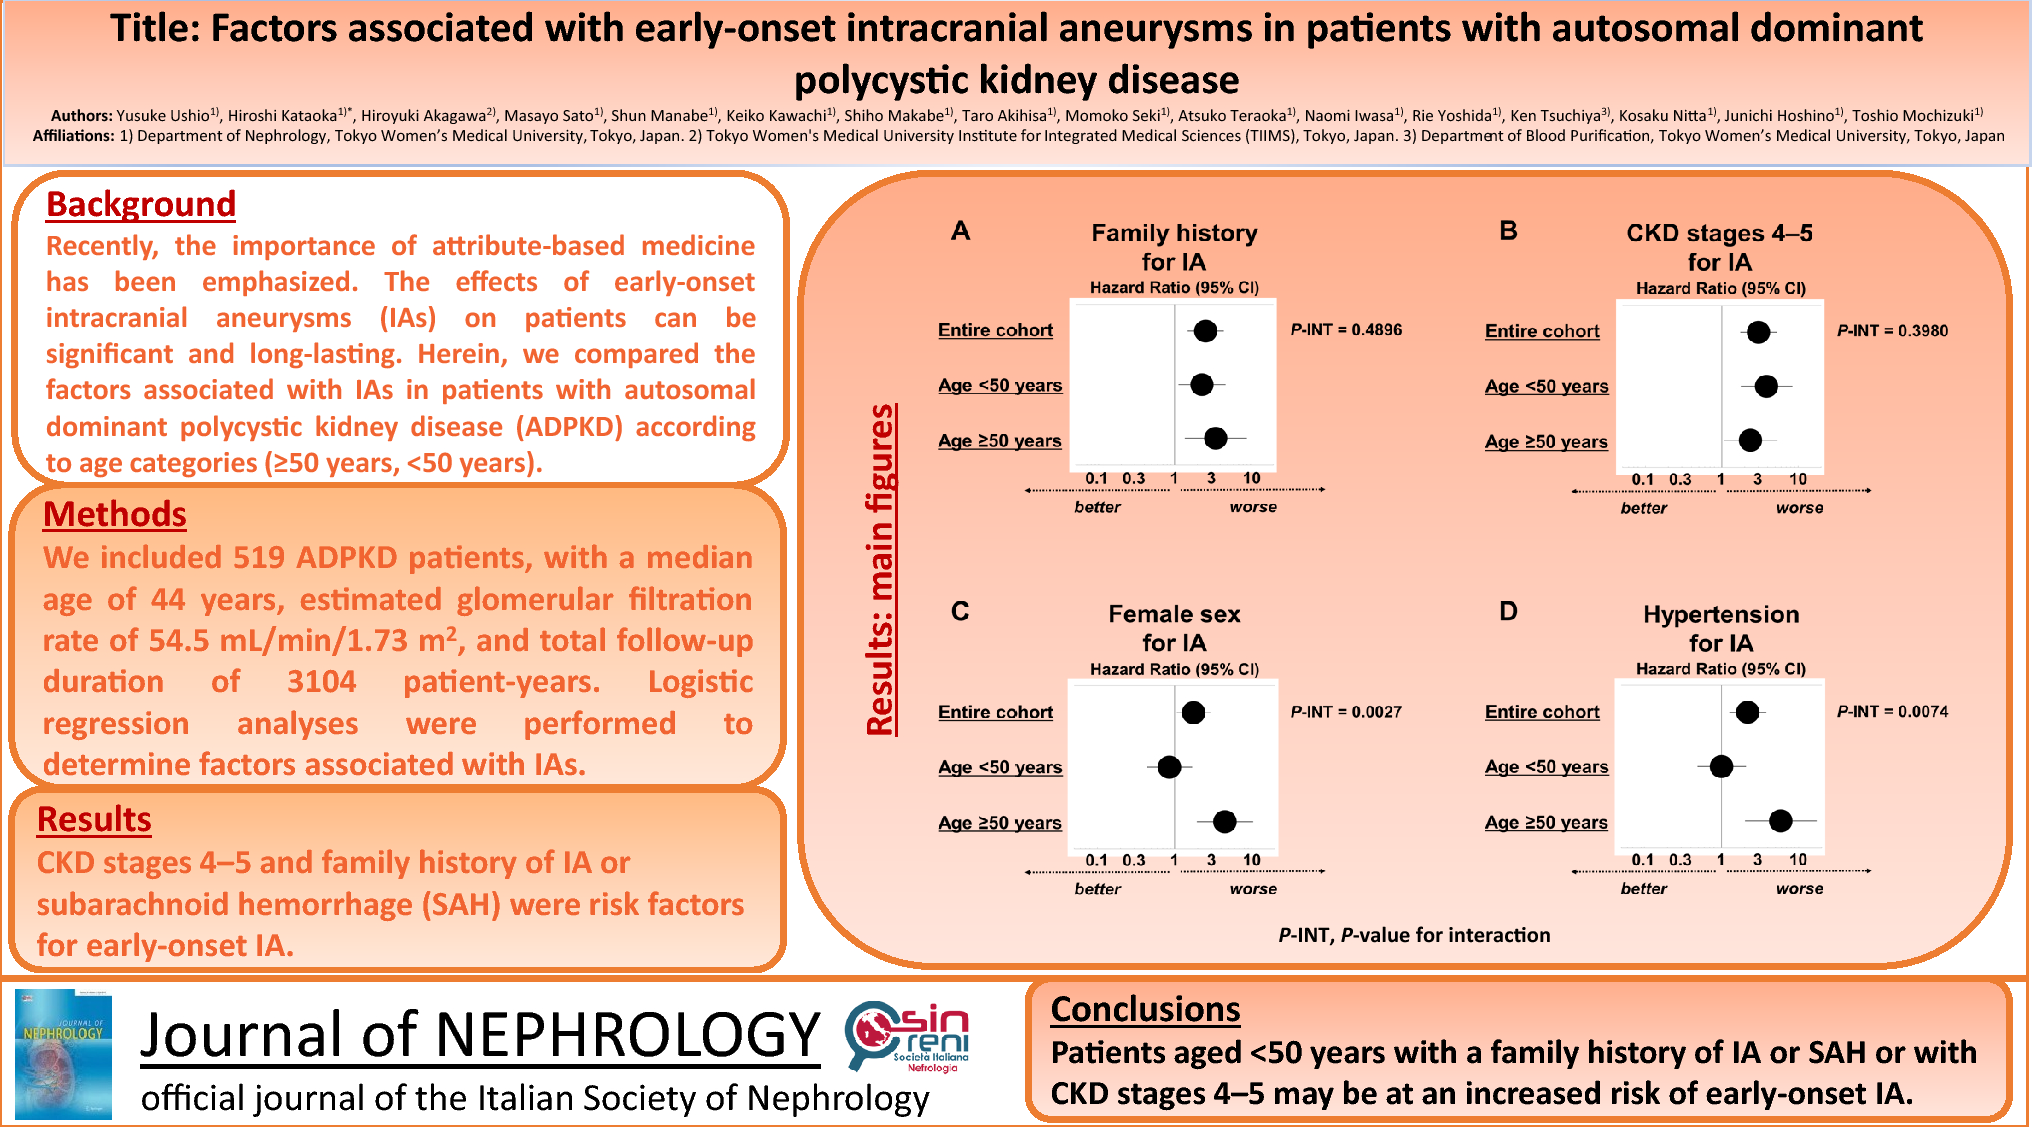 Factors associated with early-onset intracranial aneurysms in patients with autosomal dominant polycystic kidney disease